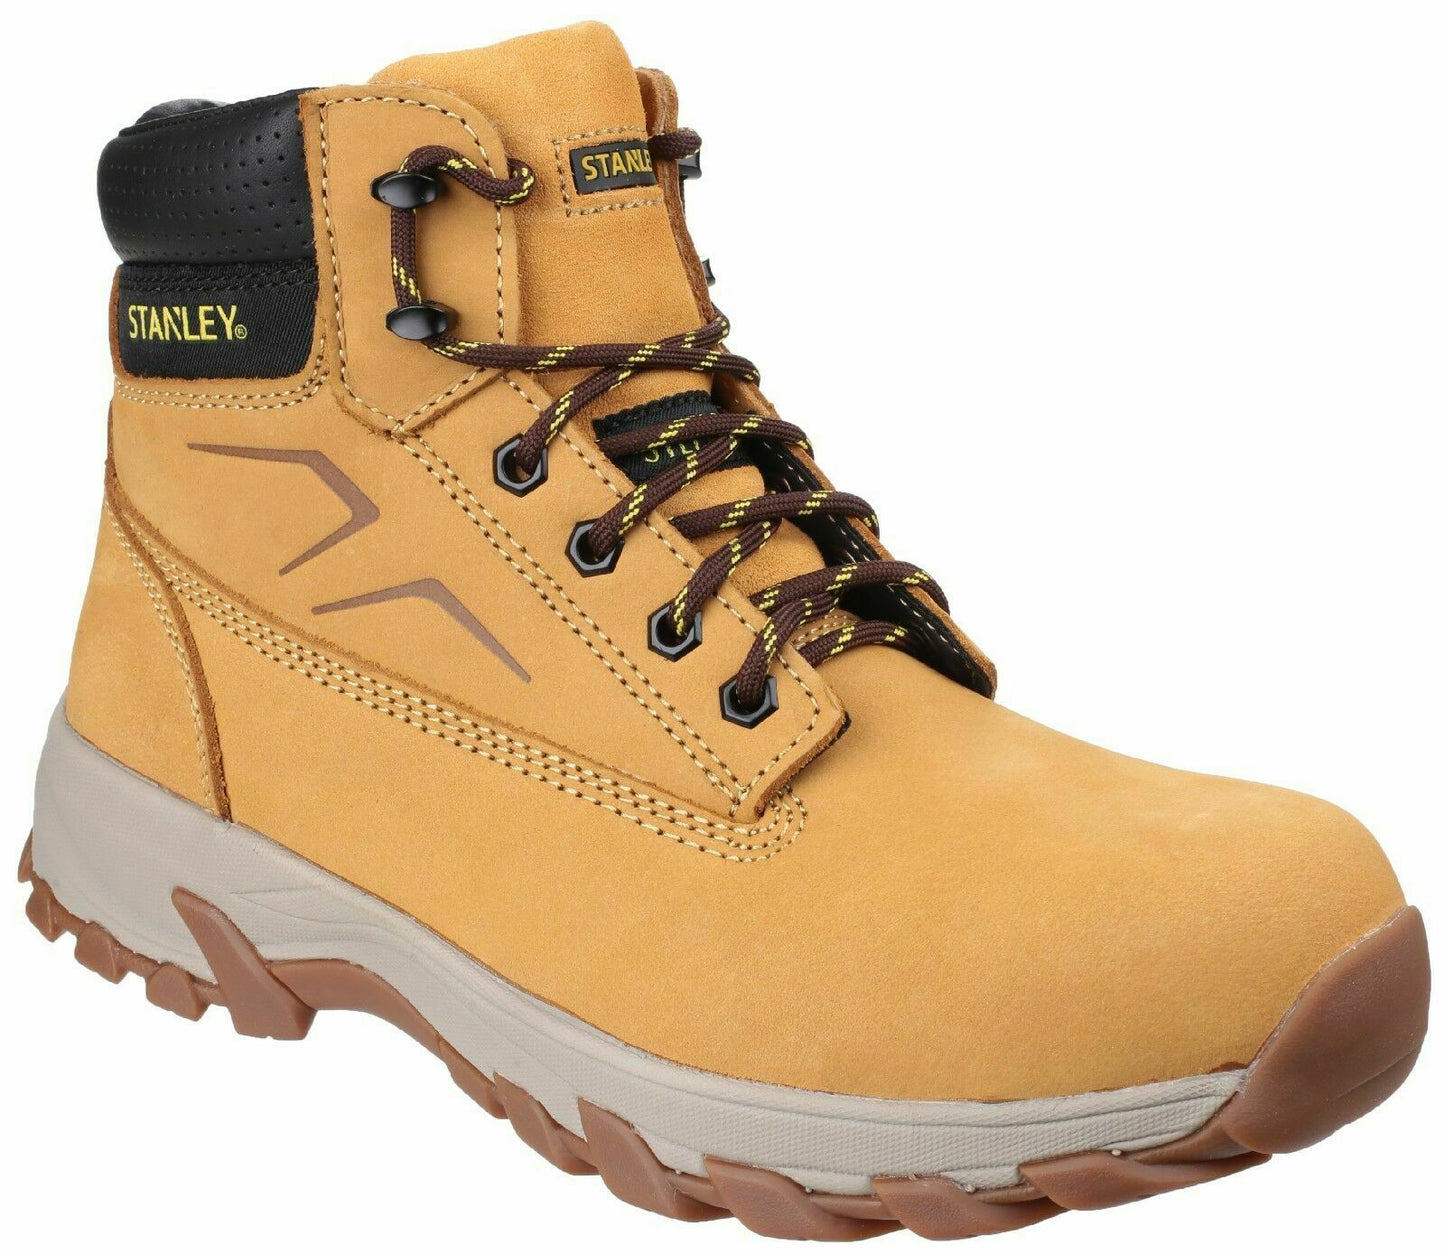 Stanley Tradesman Brown & Honey Leather Safety Work Hiking Boot Steel Toe SB-P